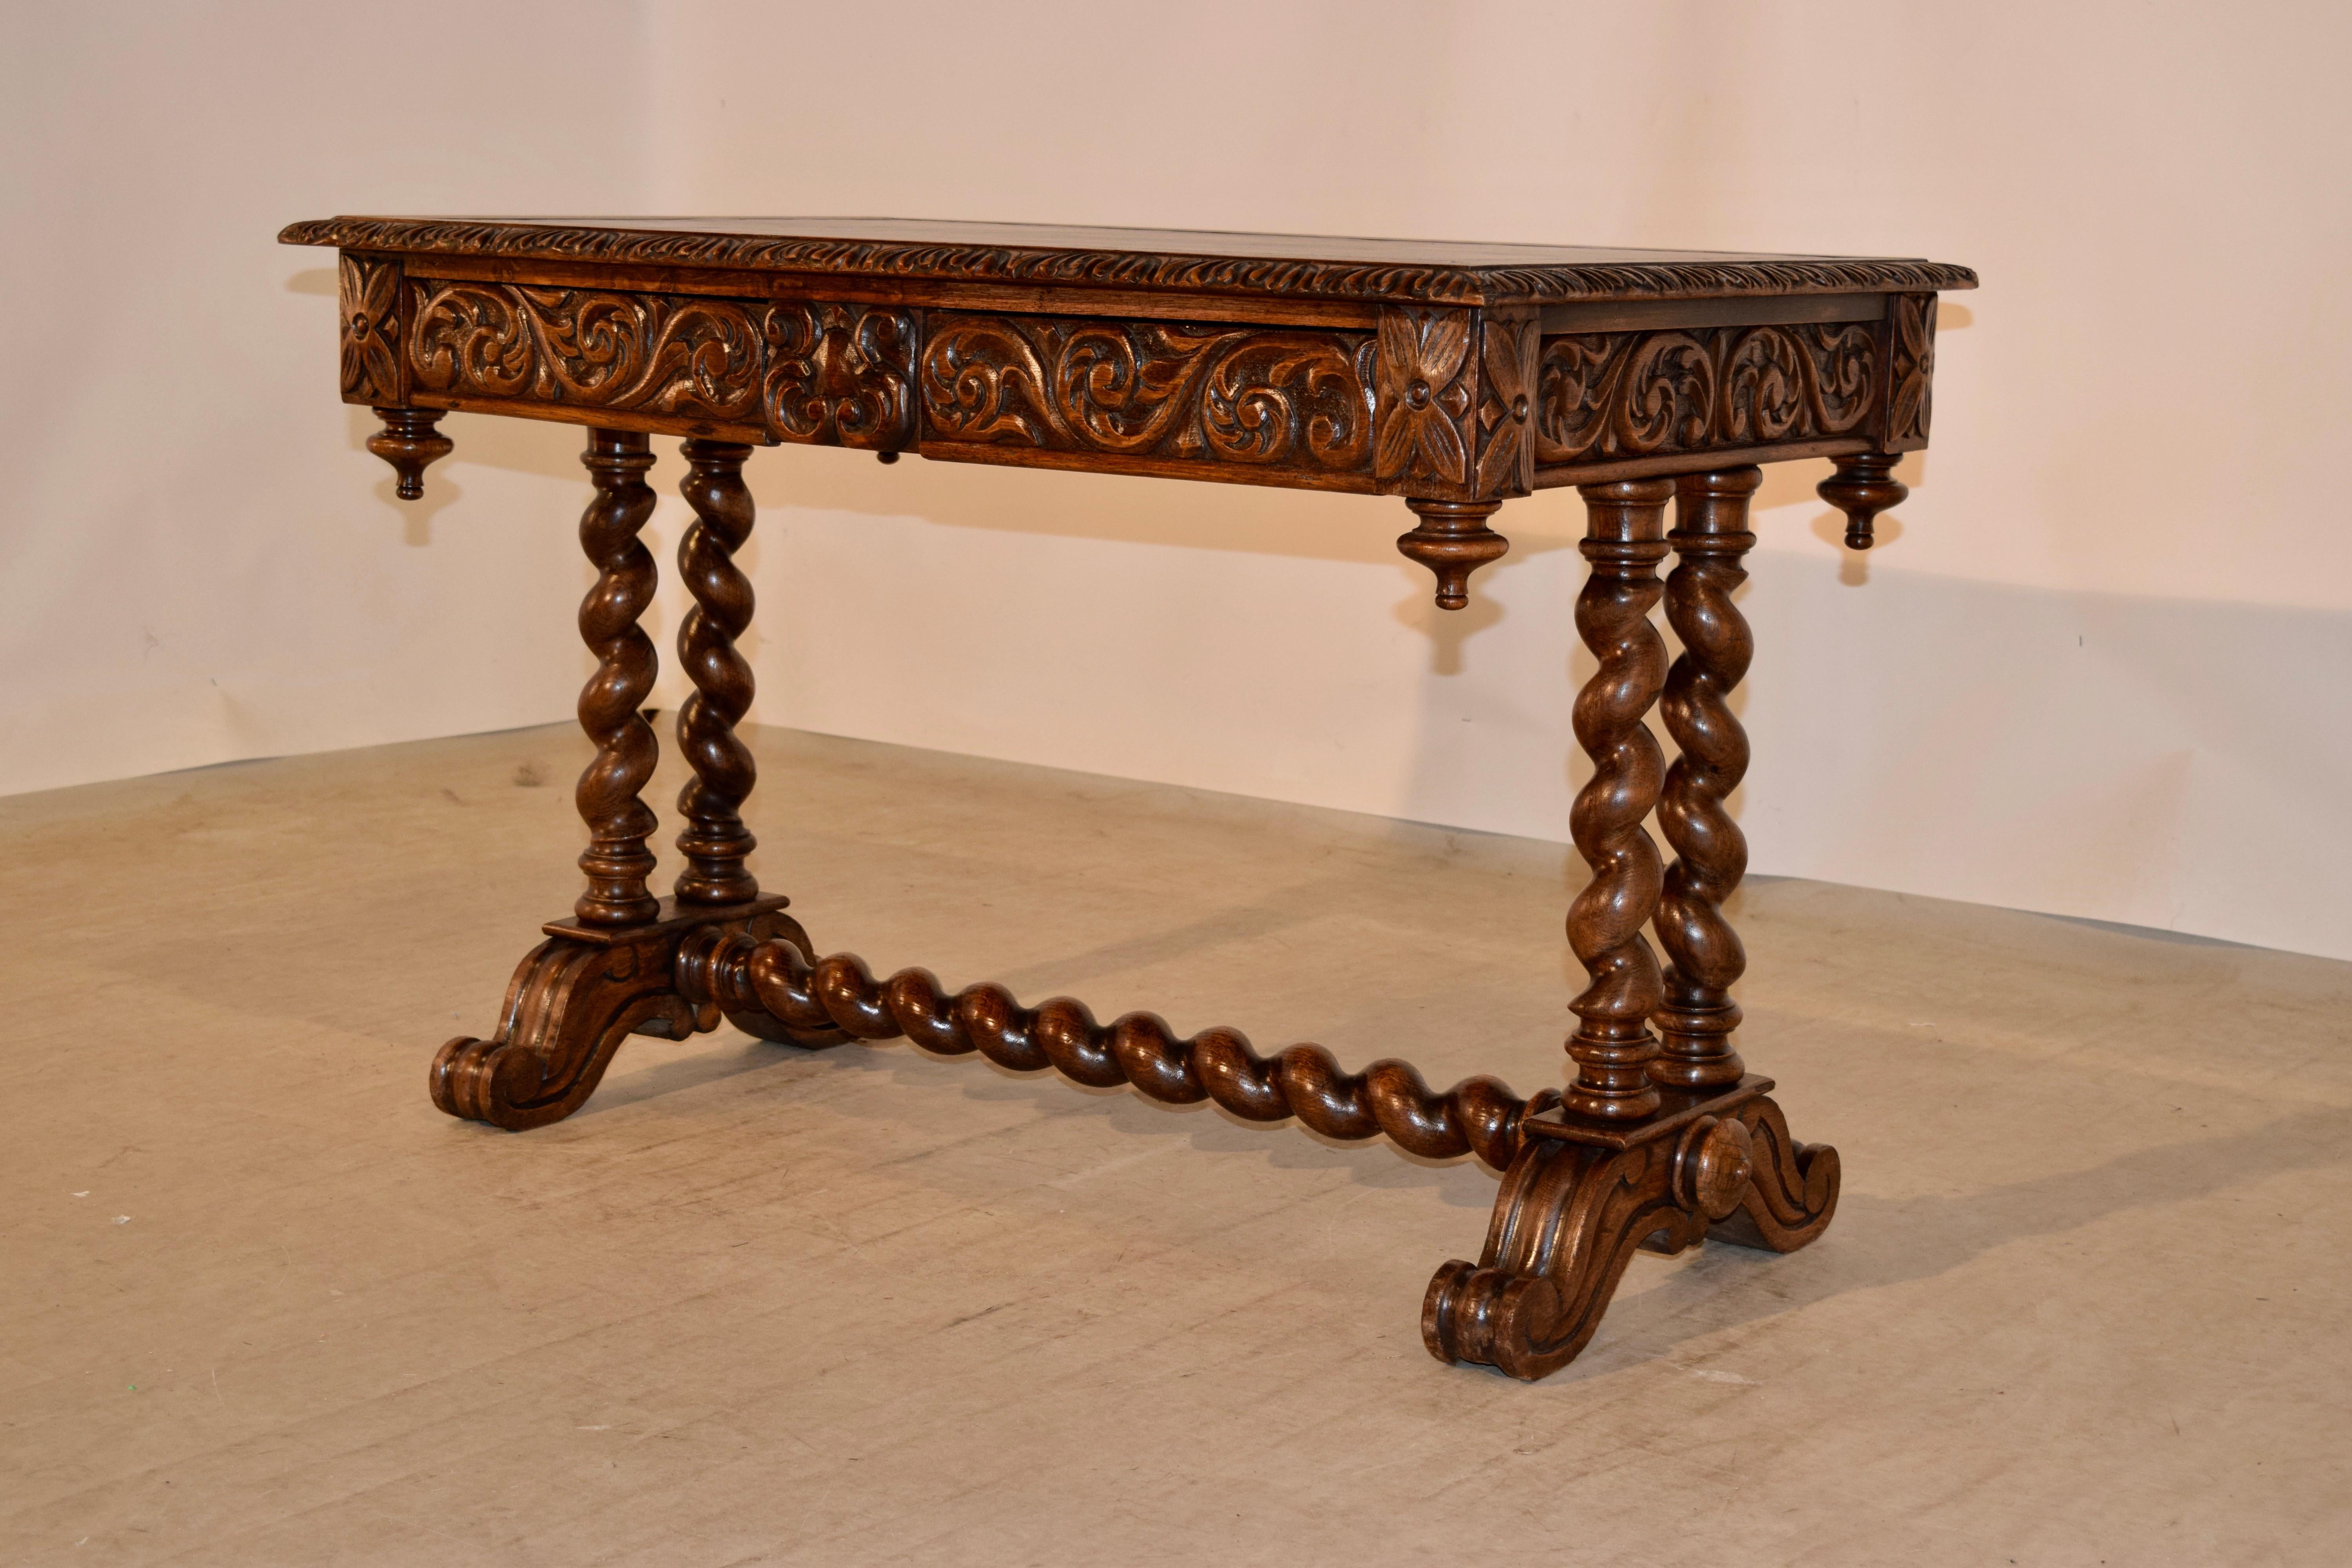 19th Century Carved Desk with Leather Top (Handgeschnitzt)